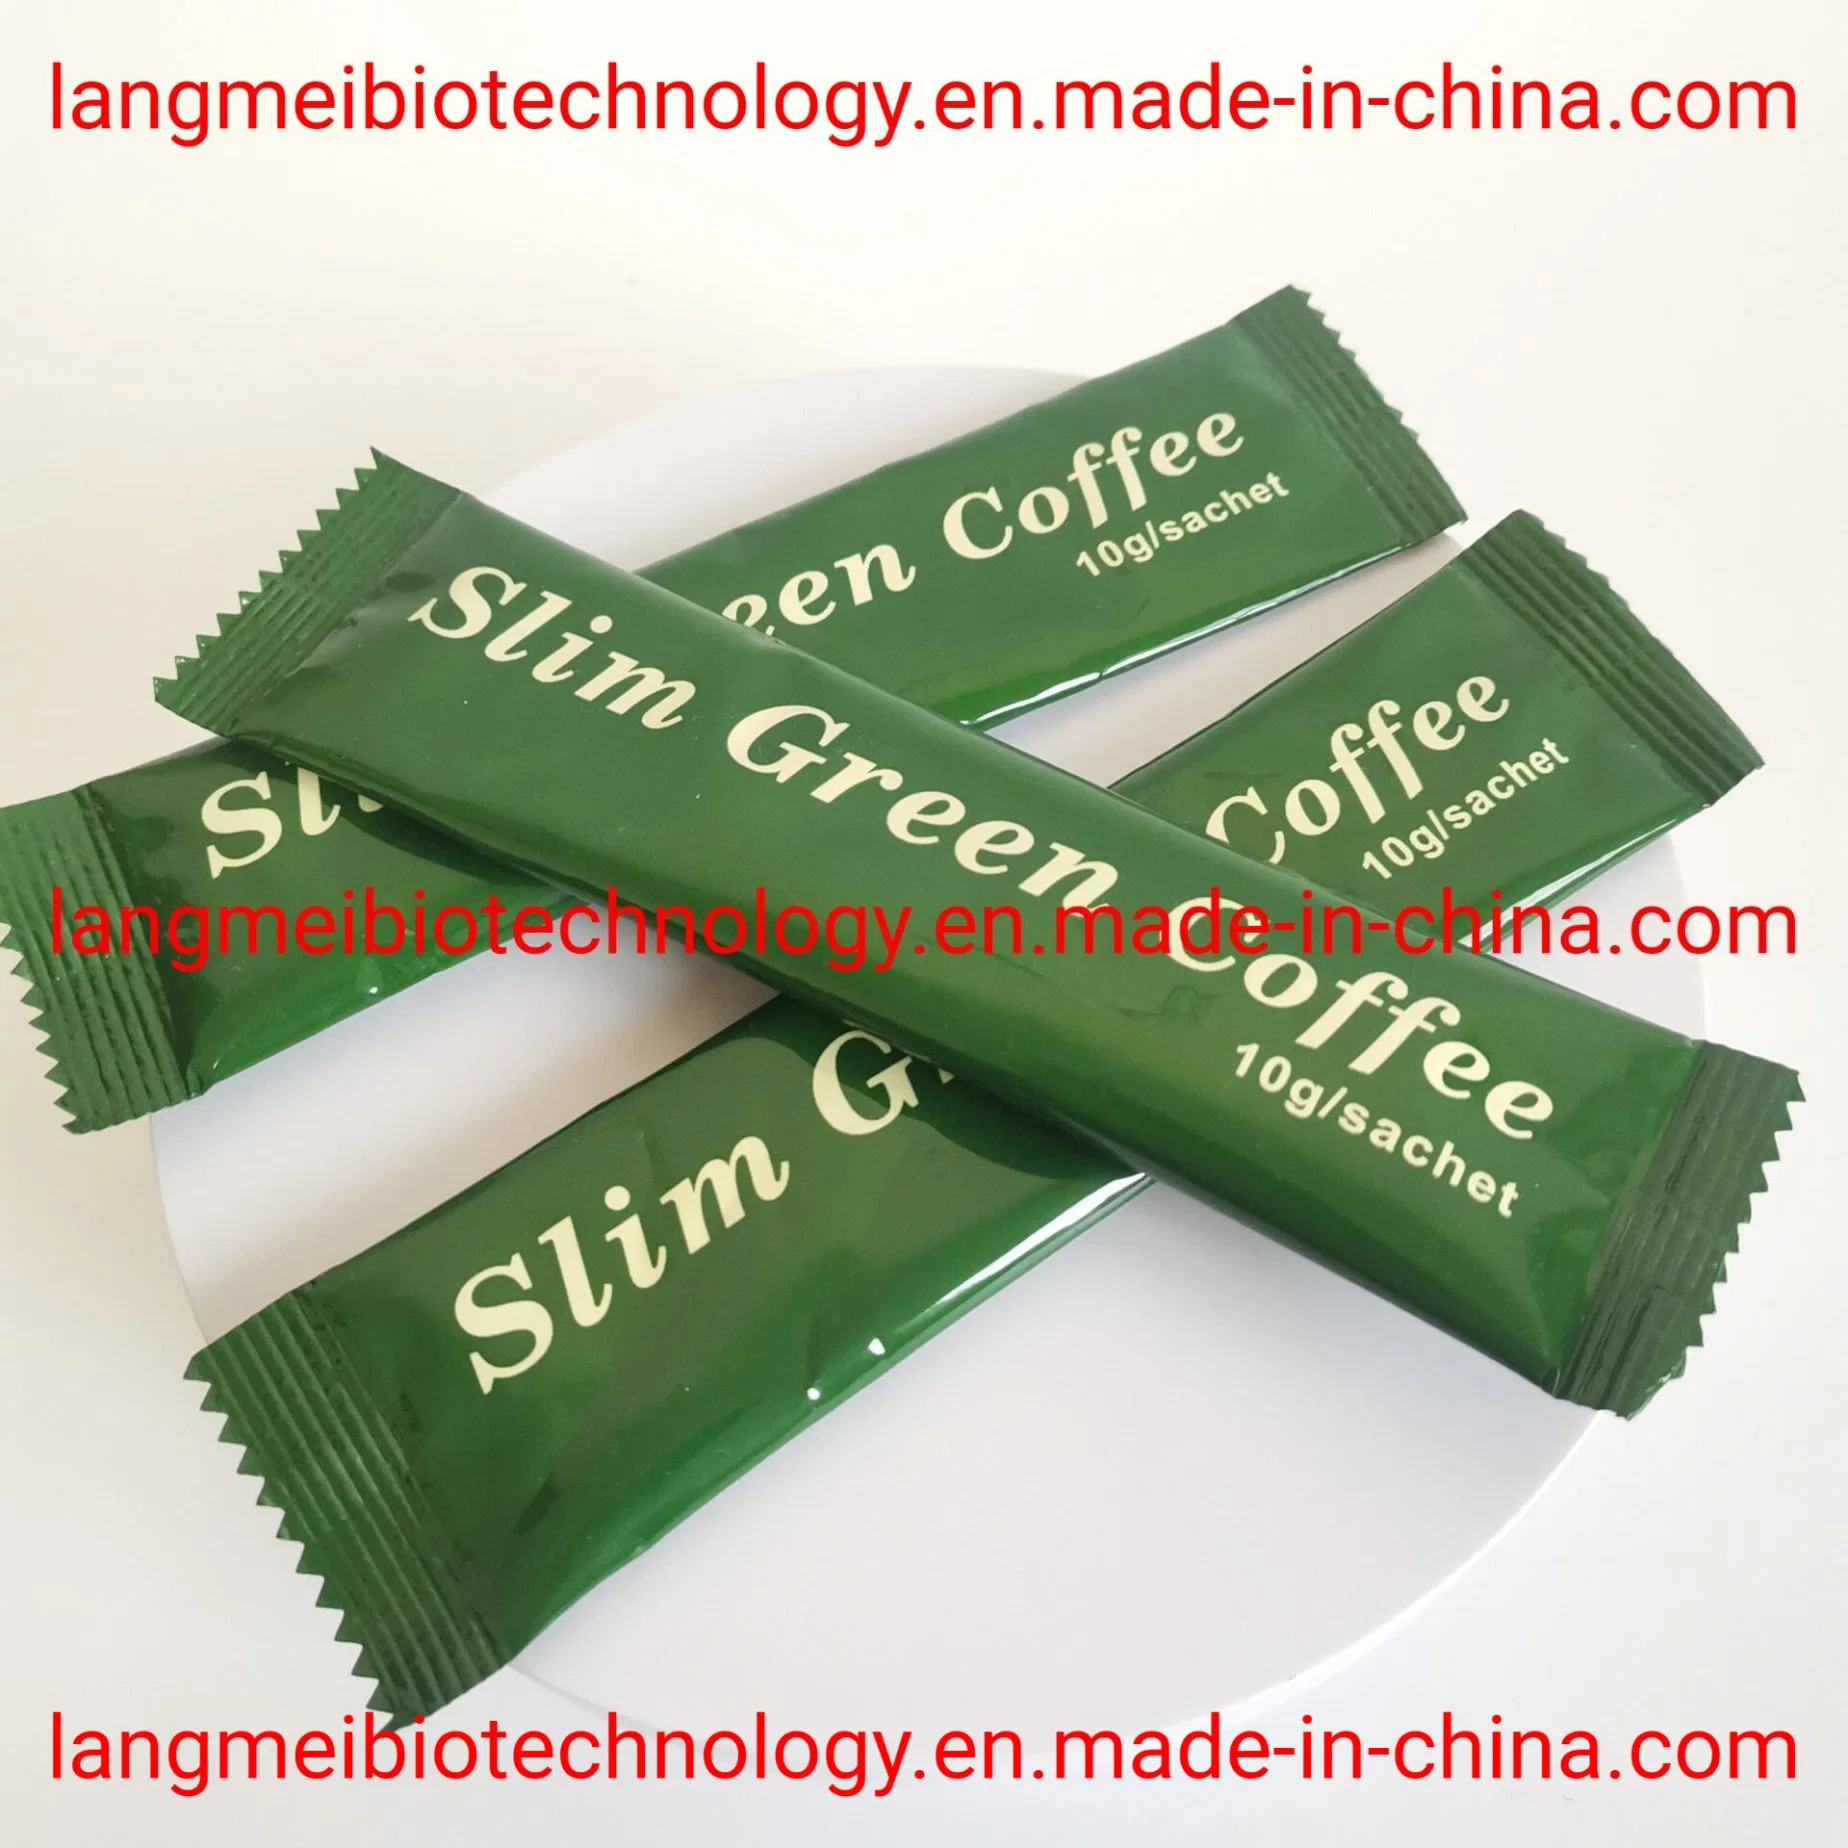 No Side 100% Original Instant Slimming Green Coffee Weight Loss Coffee